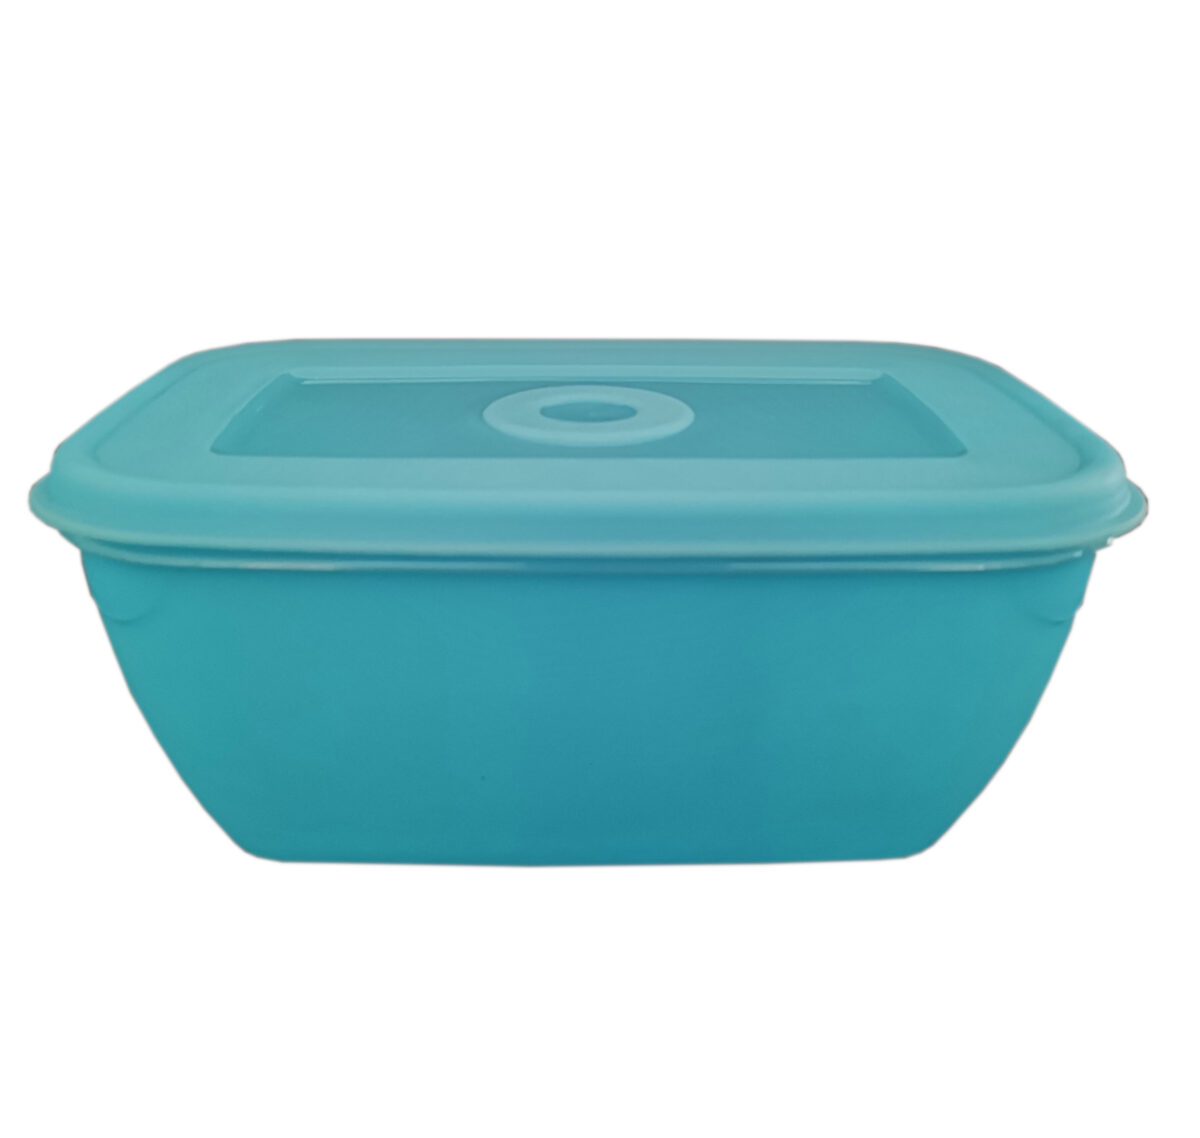 Plastic Container Rectangular with  Matching Lid